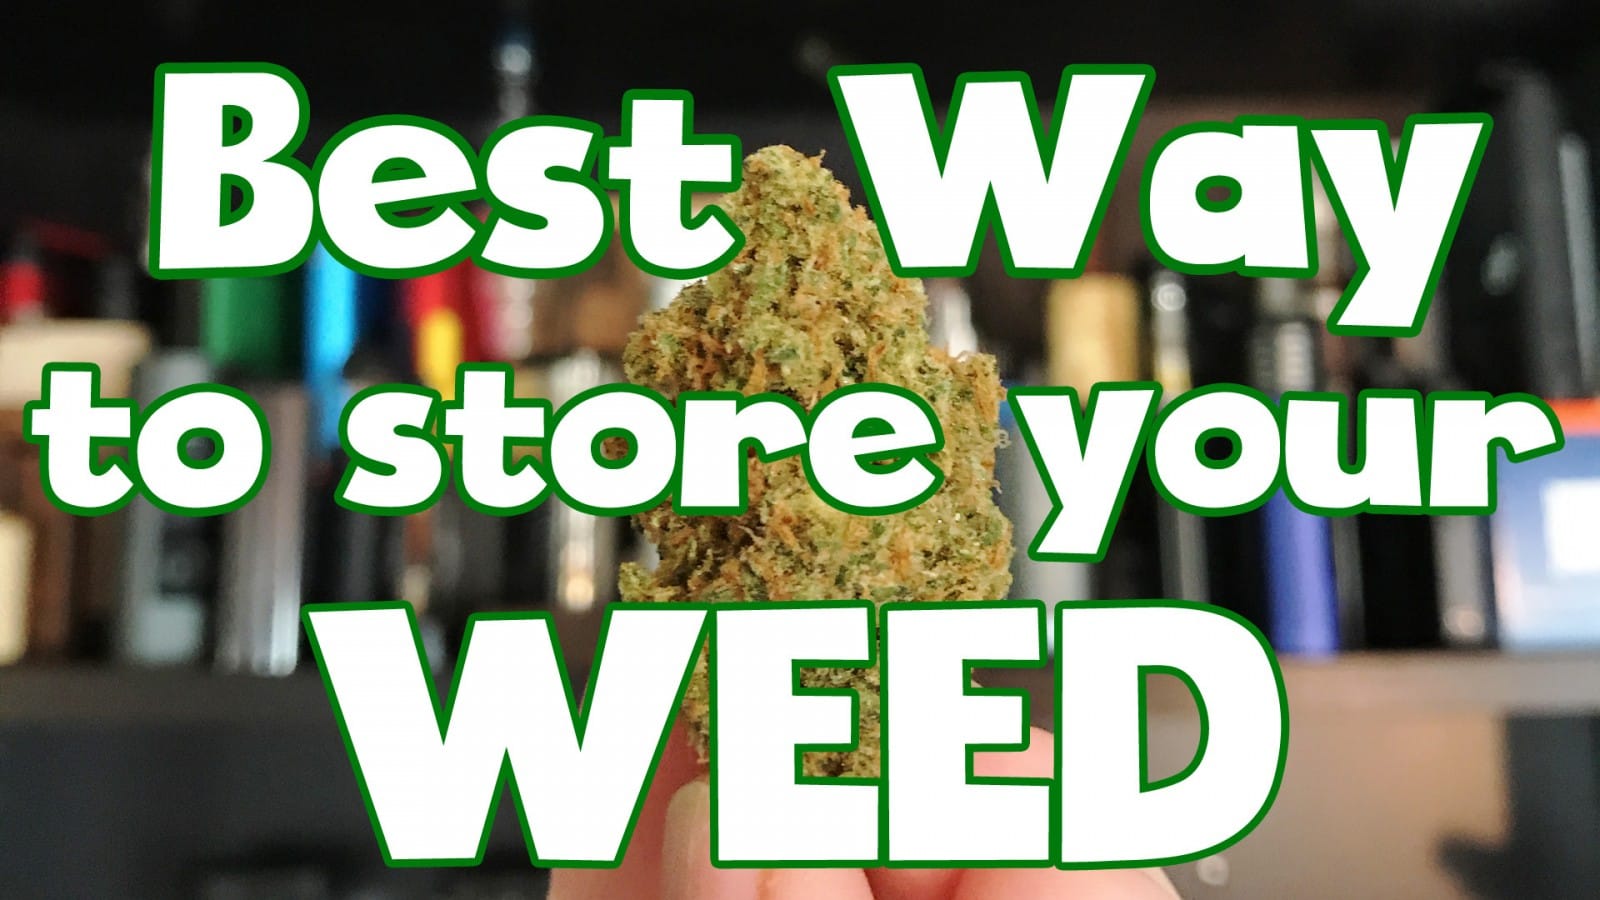 How to Store Weed